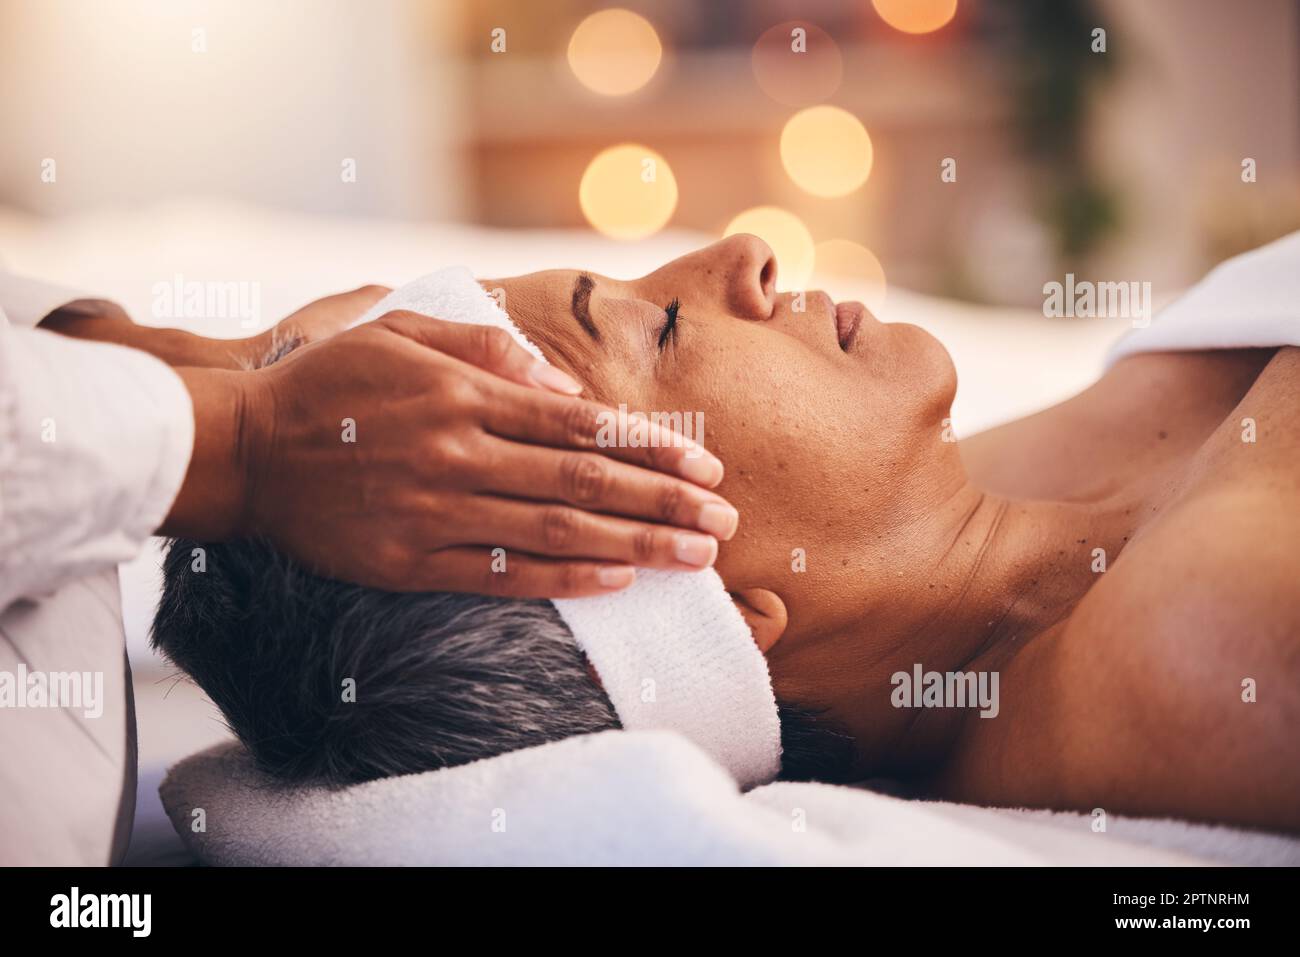 Wellness, health and massage, senior woman at a spa getting luxury beauty therapy and facial pic